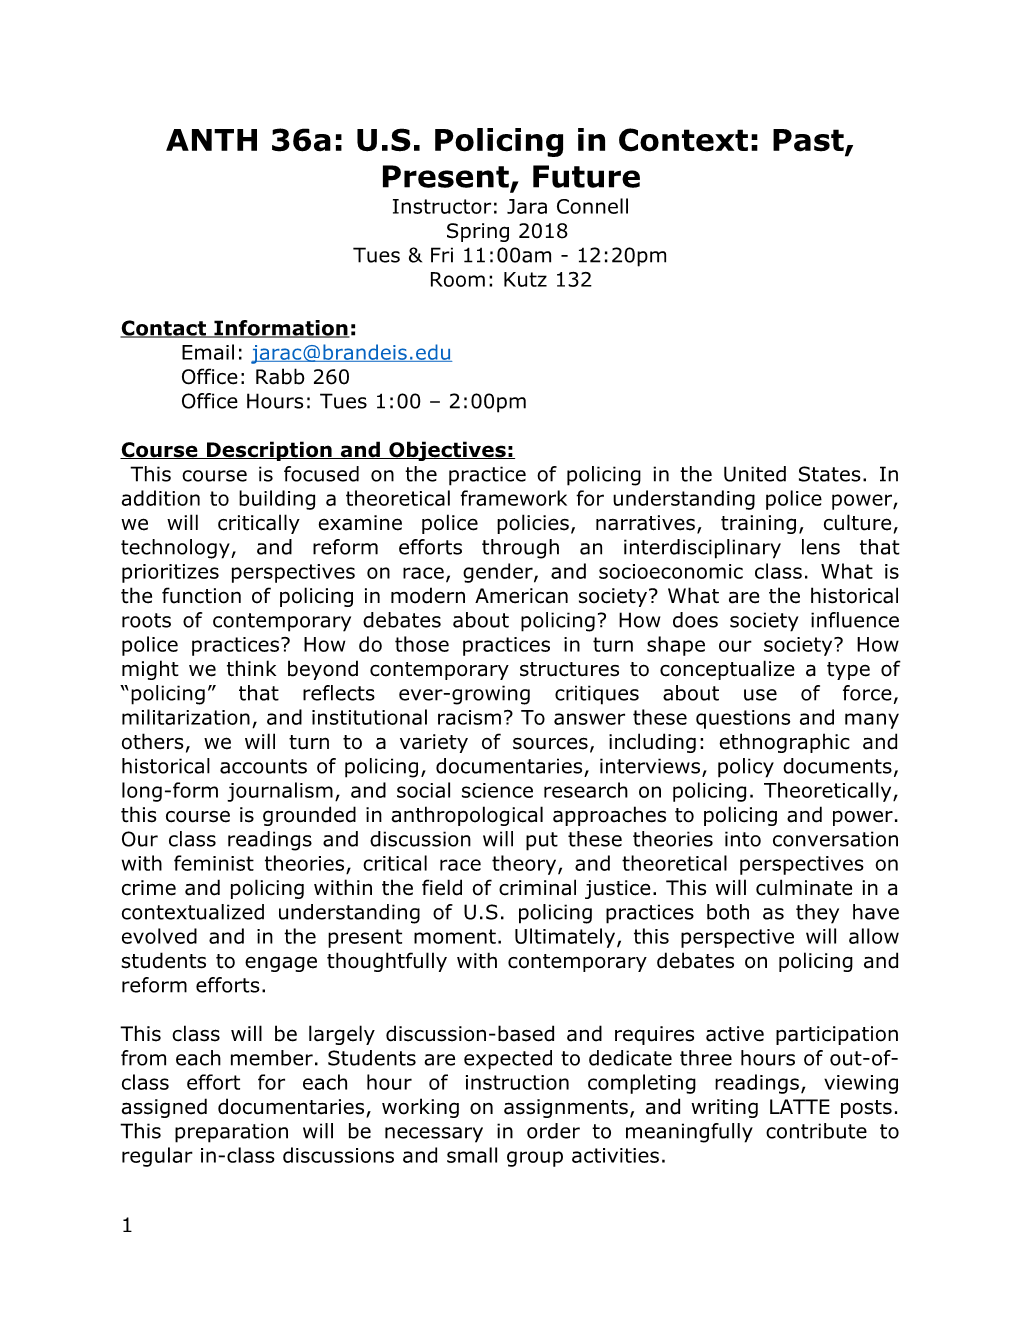 ANTH 36A: U.S. Policing in Context: Past, Present, Future